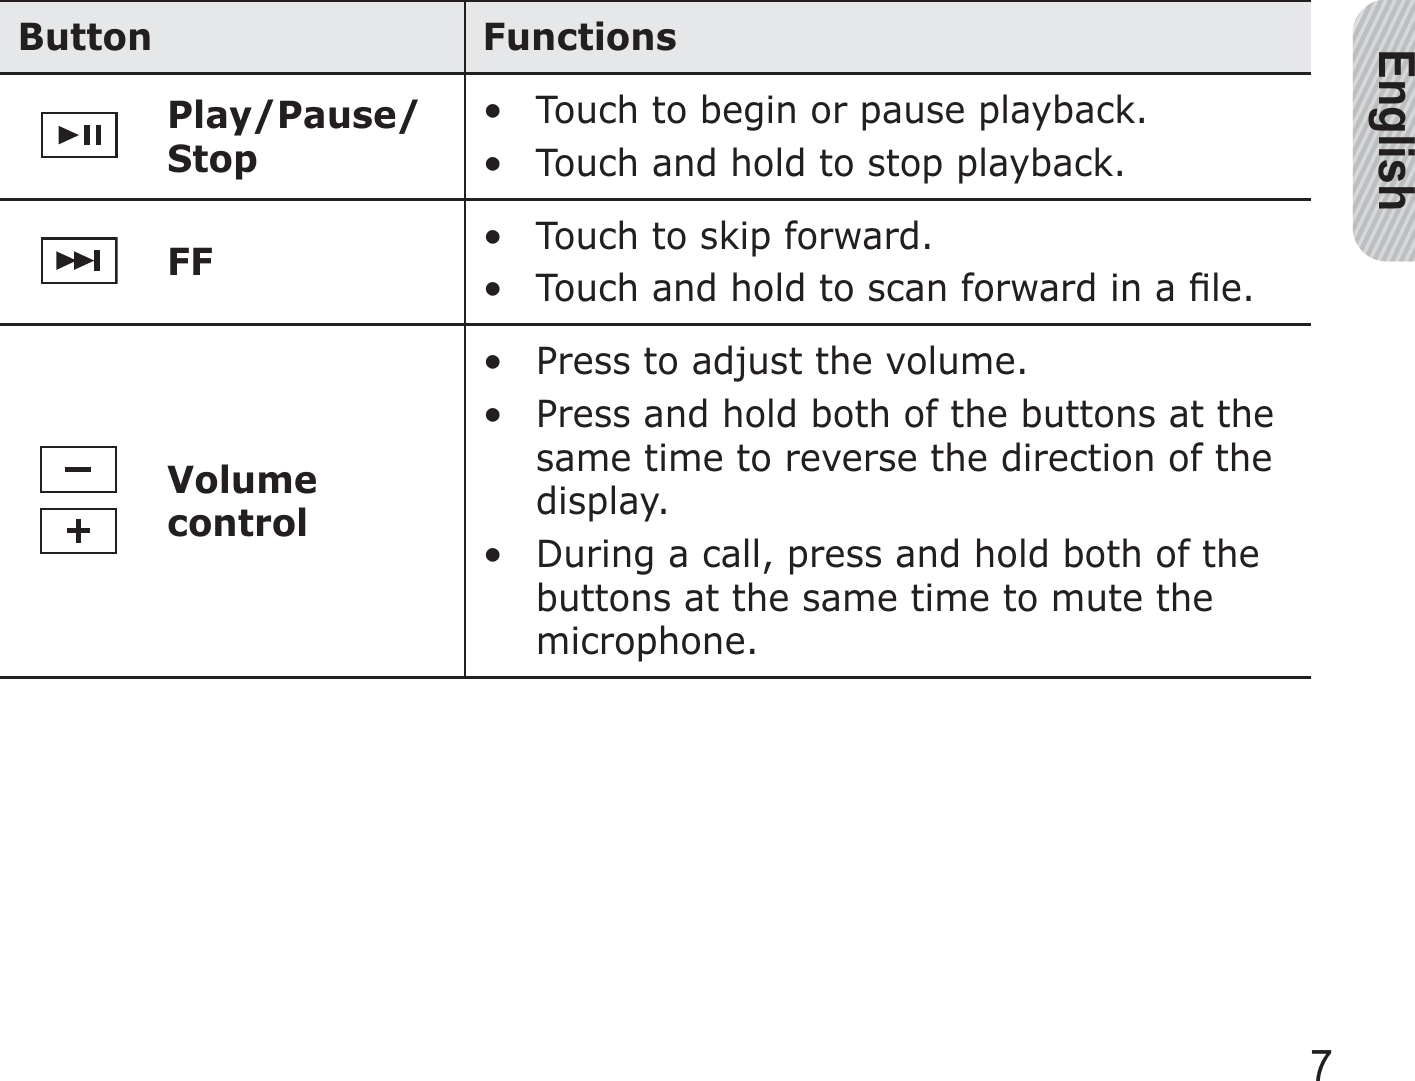 English7Button FunctionsPlay/Pause/Stop Touch to begin or pause playback.Touch and hold to stop playback.••FF  Touch to skip forward.Touch and hold to scan forward in a ﬁle.••Volume control Press to adjust the volume.Press and hold both of the buttons at the same time to reverse the direction of the display.During a call, press and hold both of the buttons at the same time to mute the microphone.•••